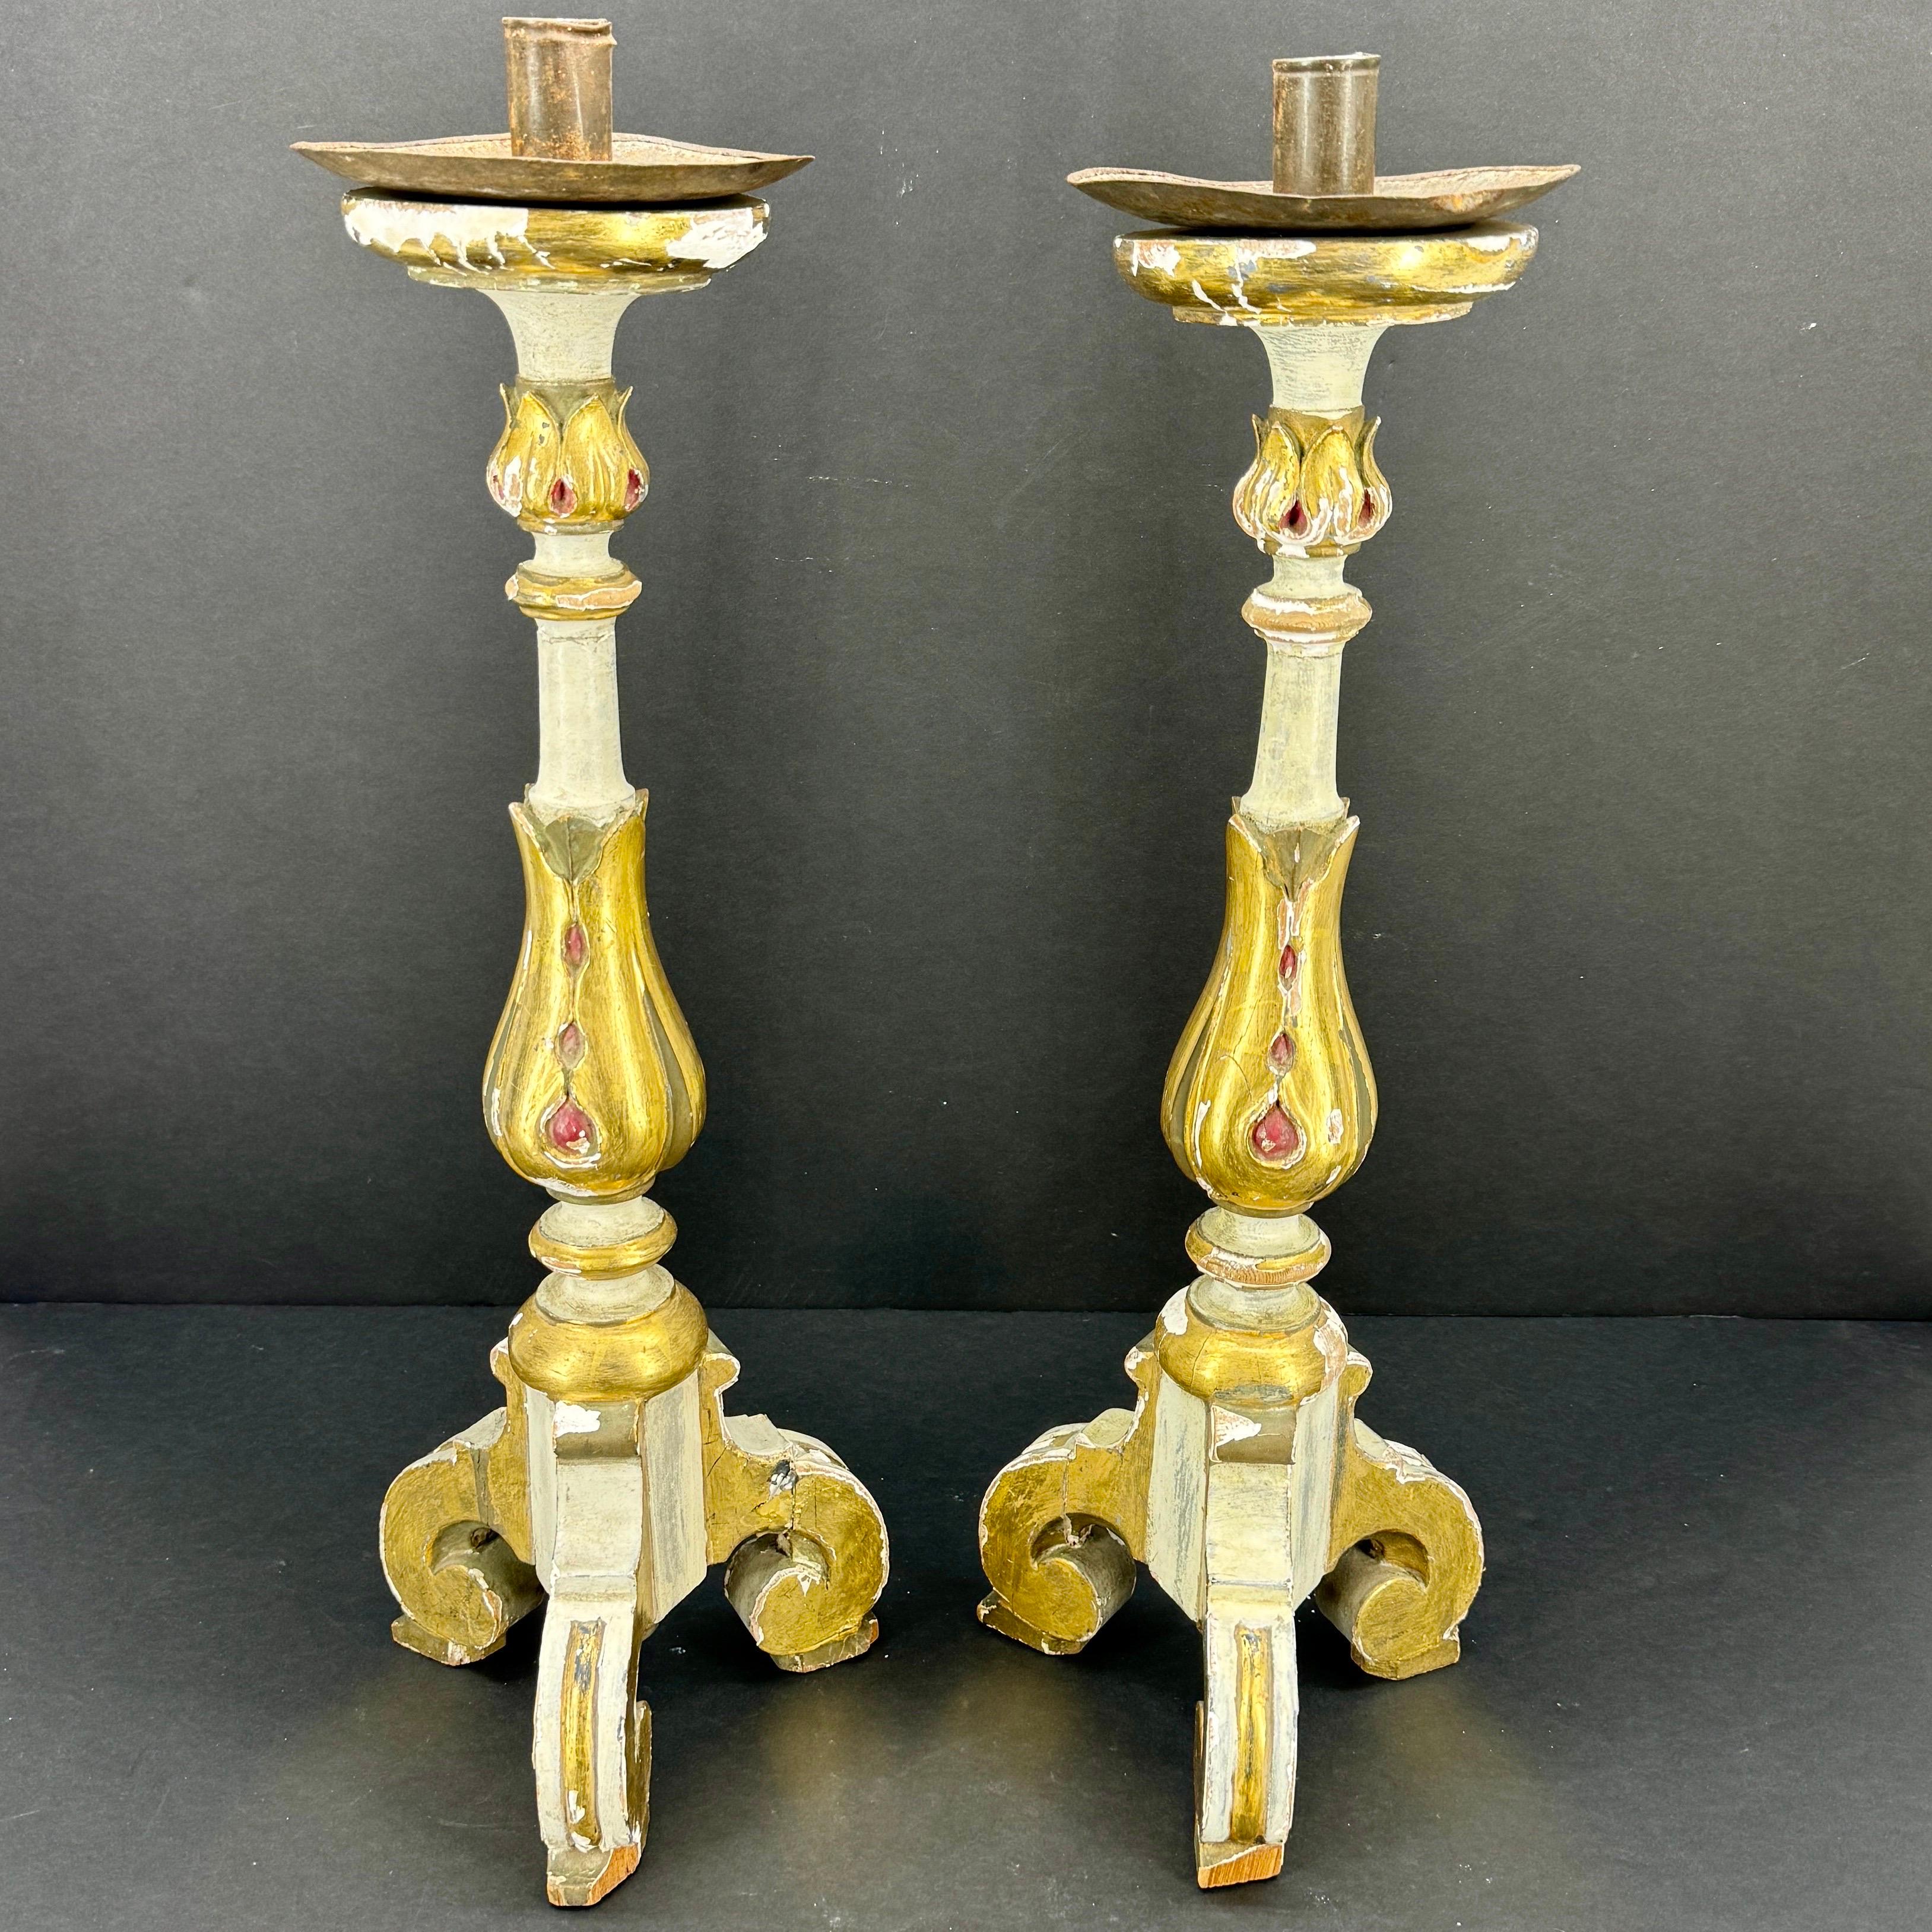 Vintage Gilded and Painted Vintage Wood Alter Candlesticks, Italy

Authentic carved alter sticks with original paint and patina, untouched. Wonderful addition on a table or mantle in any formal or informal home seeking that European rustic vibe.
